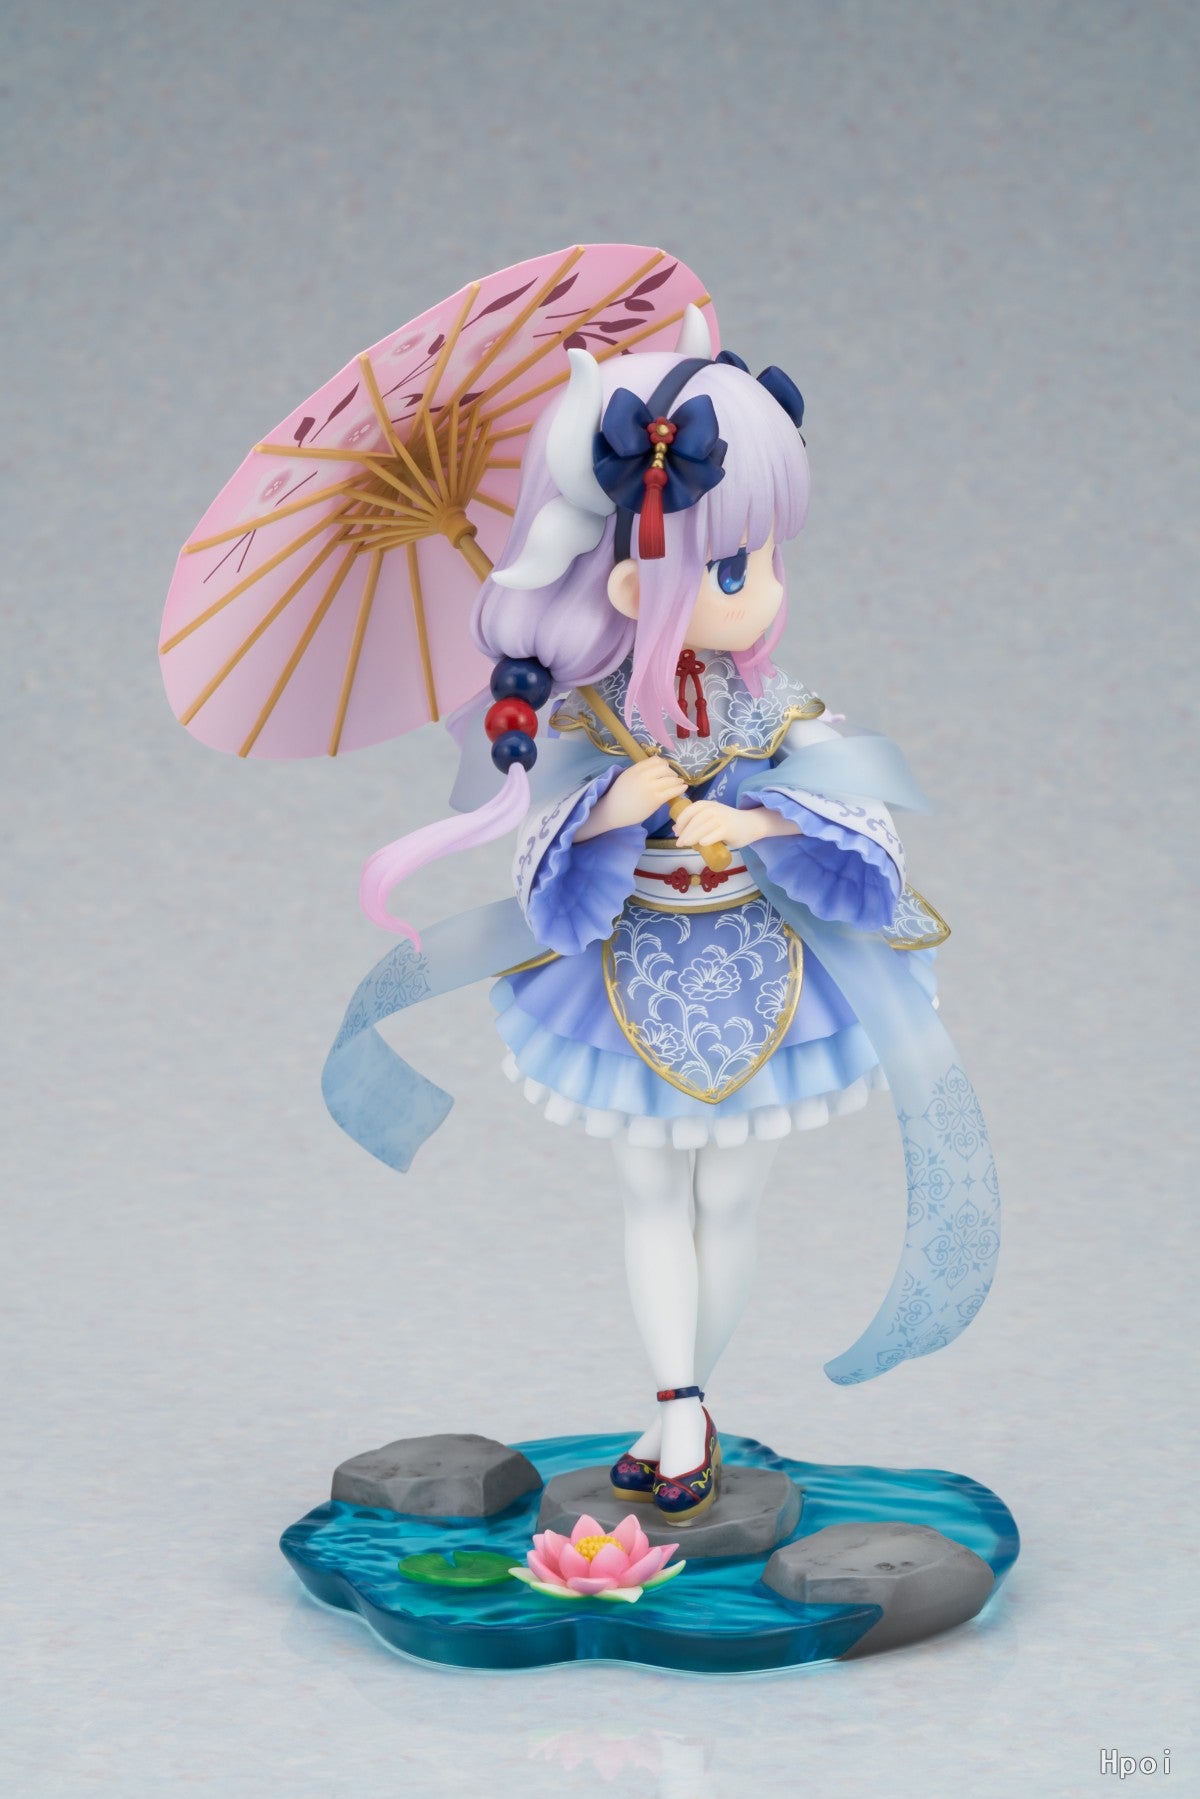 This model is a celebration of Kanna's innocence & otherworldly grace. | If you are looking for more Miss Kobayashi's Merch, We have it all! | Check out all our Anime Merch now!